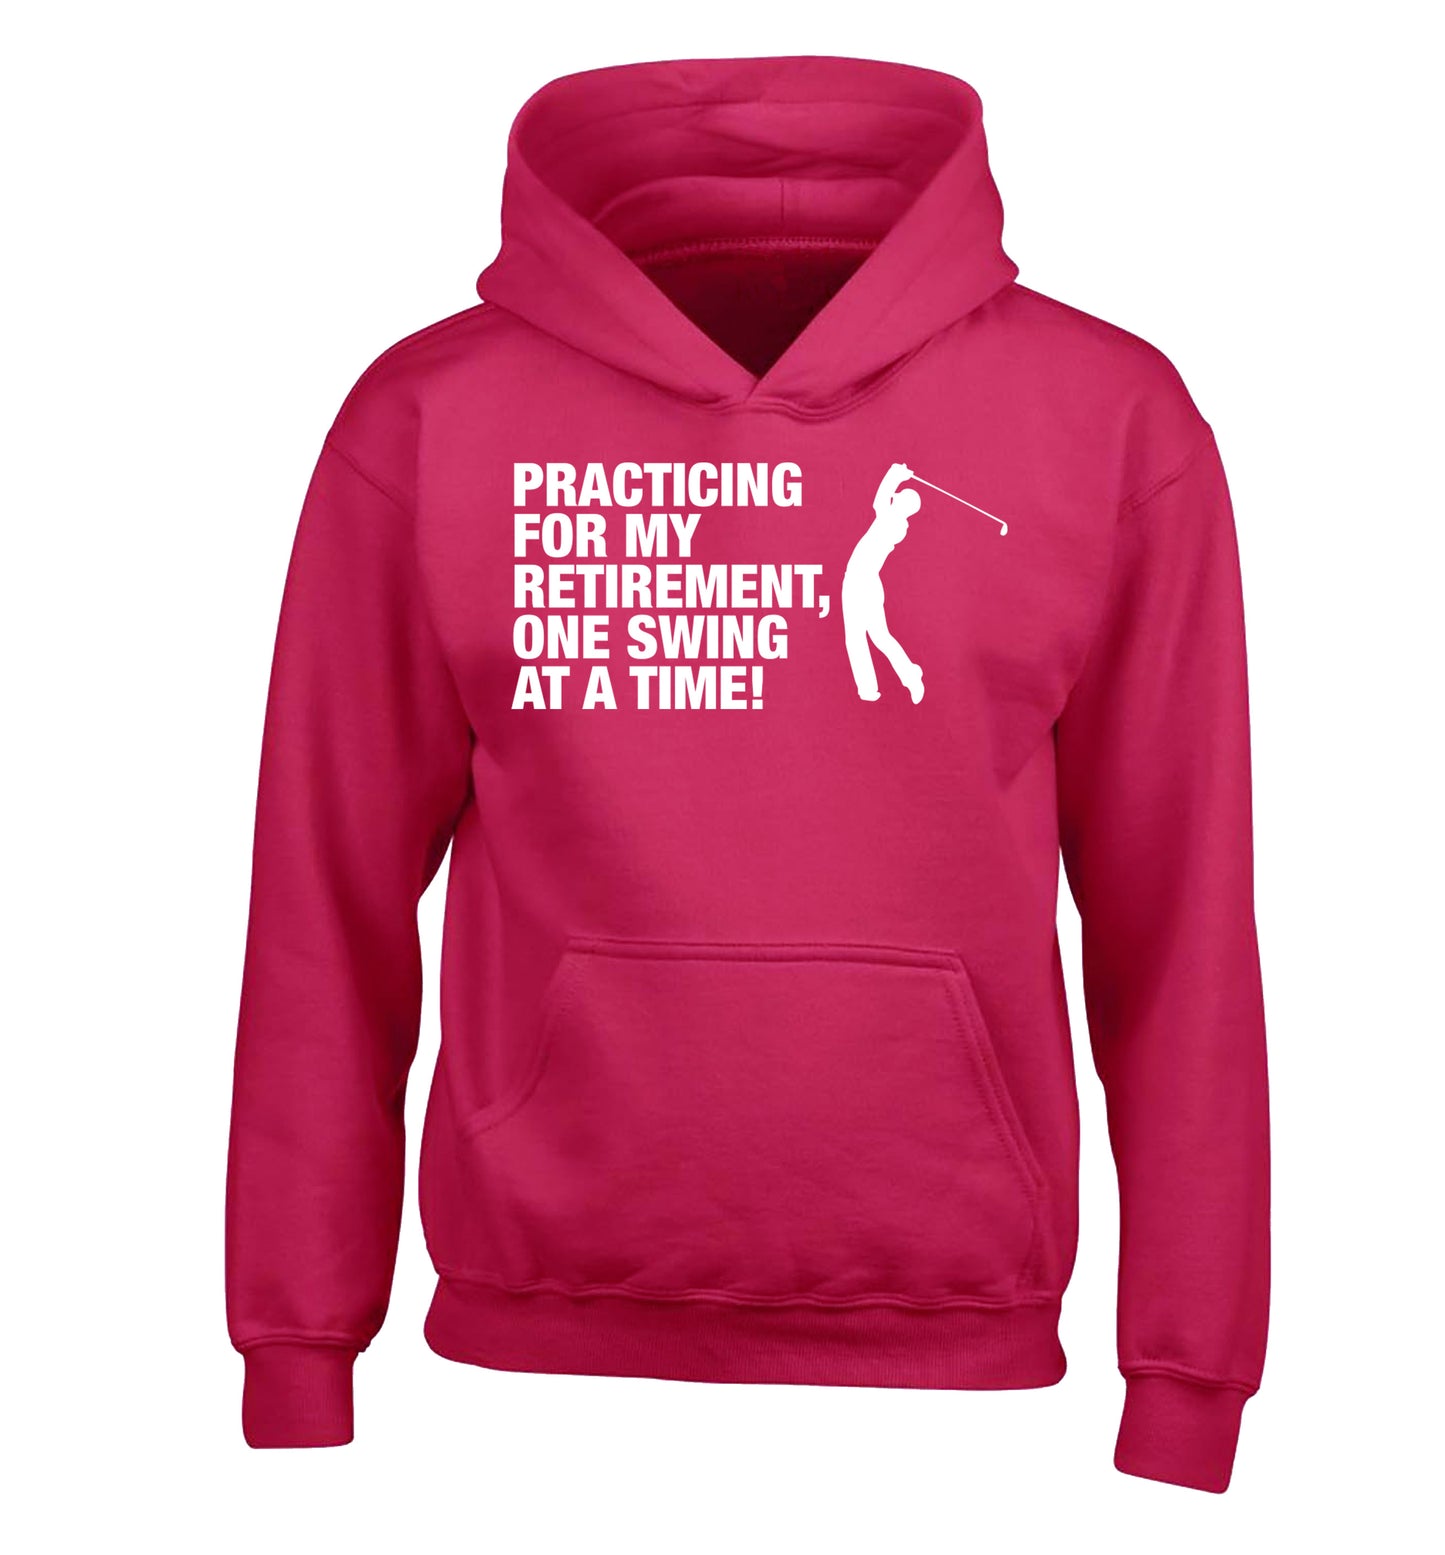 Practicing for my retirement one swing at a time children's pink hoodie 12-13 Years